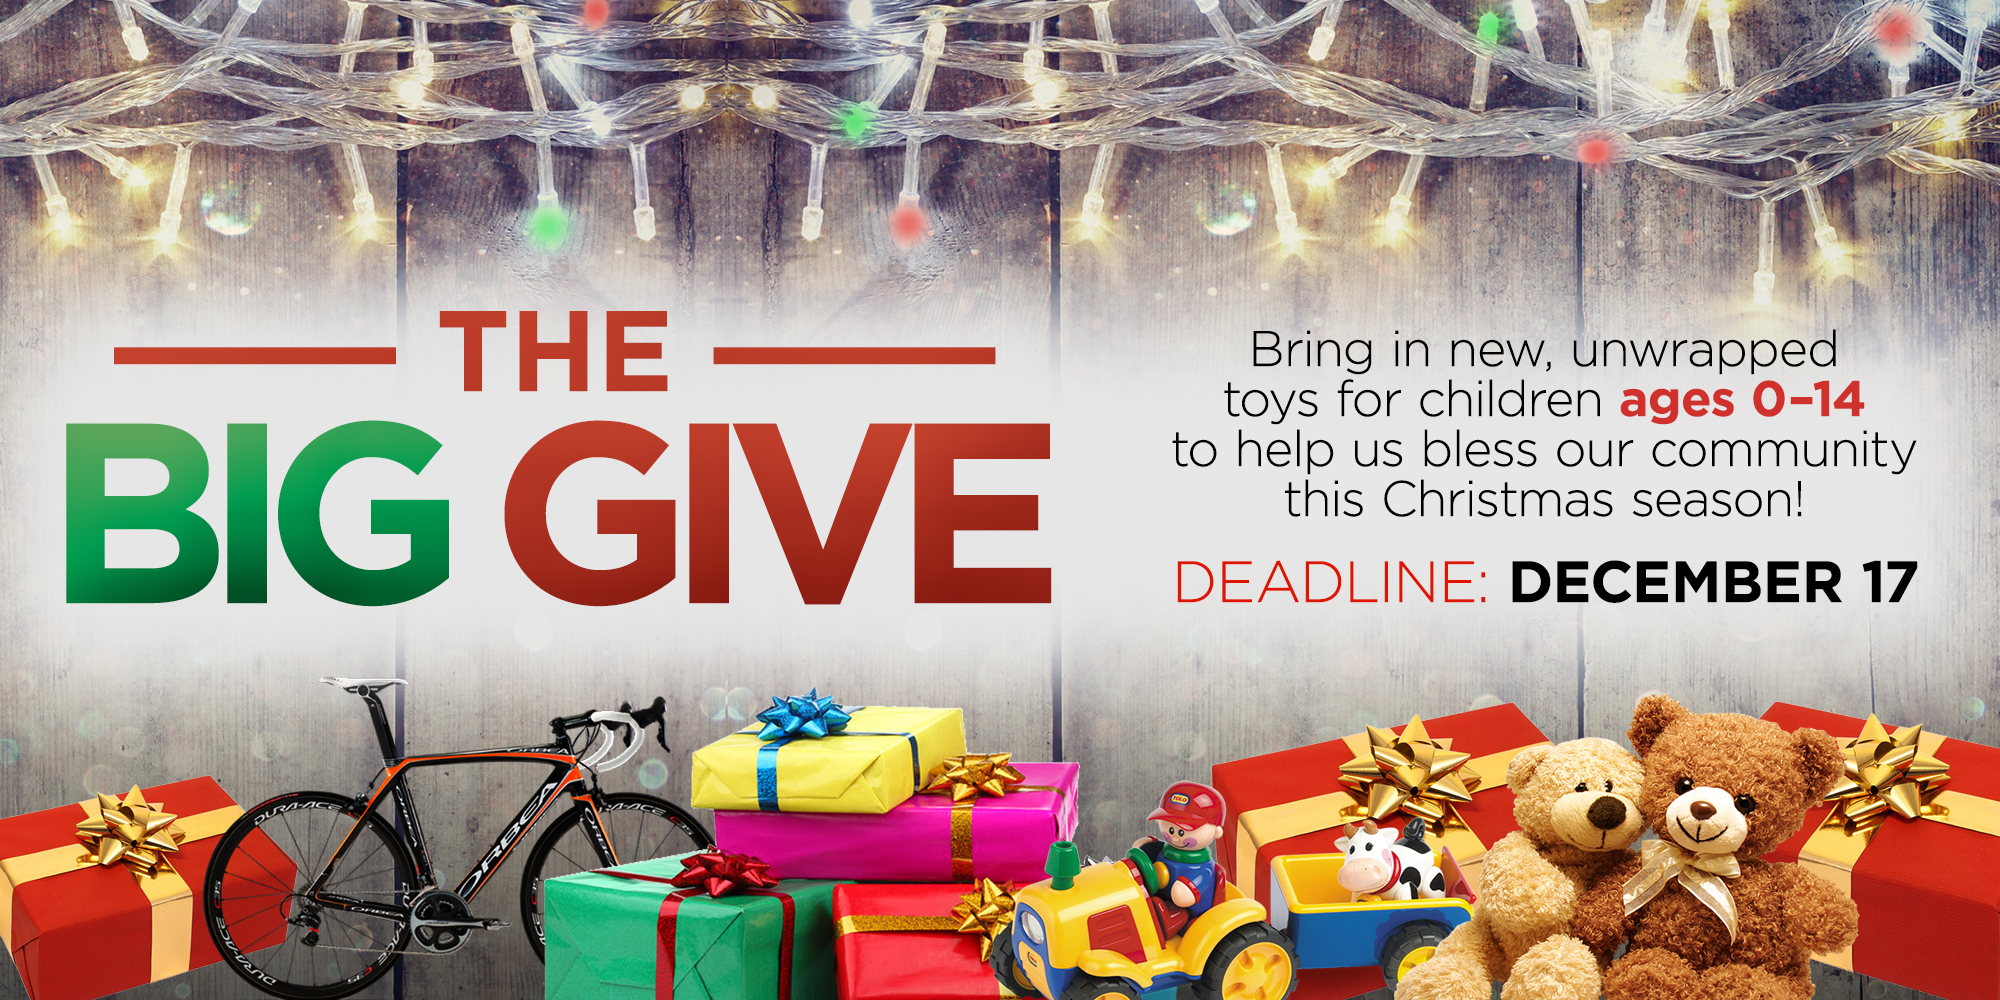 The BIG GIVE | Bring in new, unwrapped toys for children ages 0 - 14 to help us bless our community this Chirstmas season! DEADLINE: December 17th